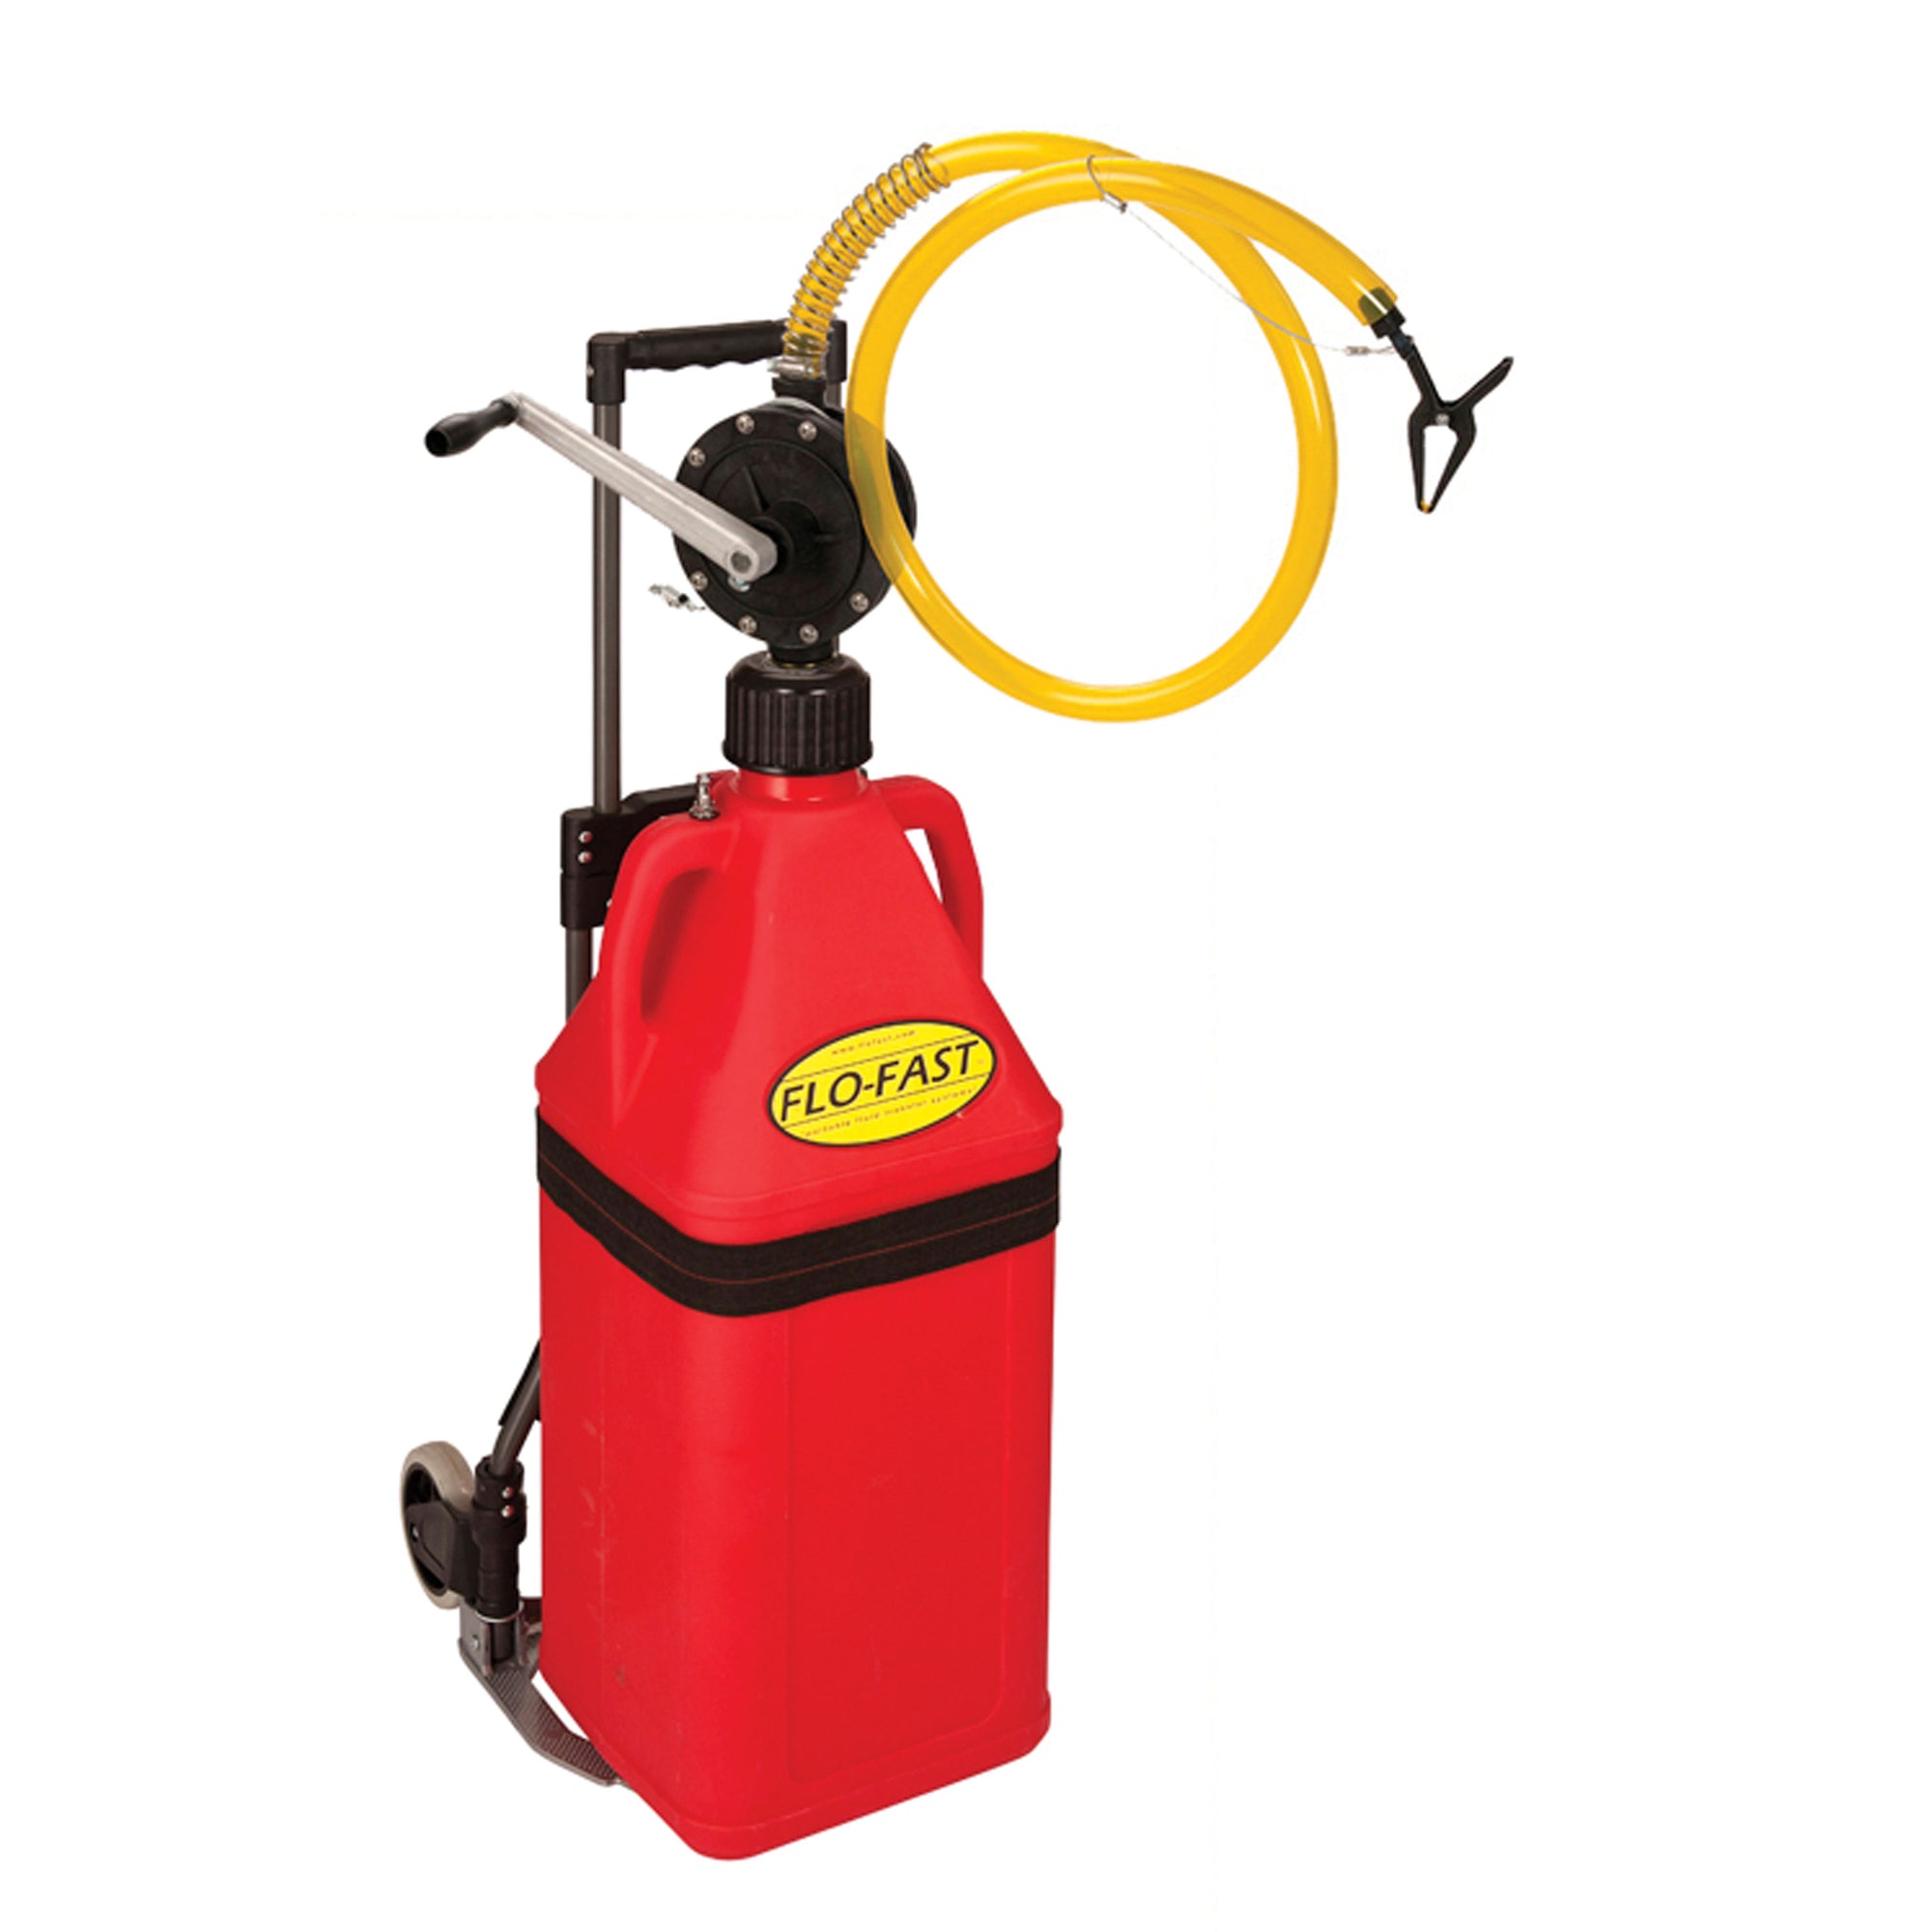 Flo-Fast 30105-R System Pump, Red 10.5